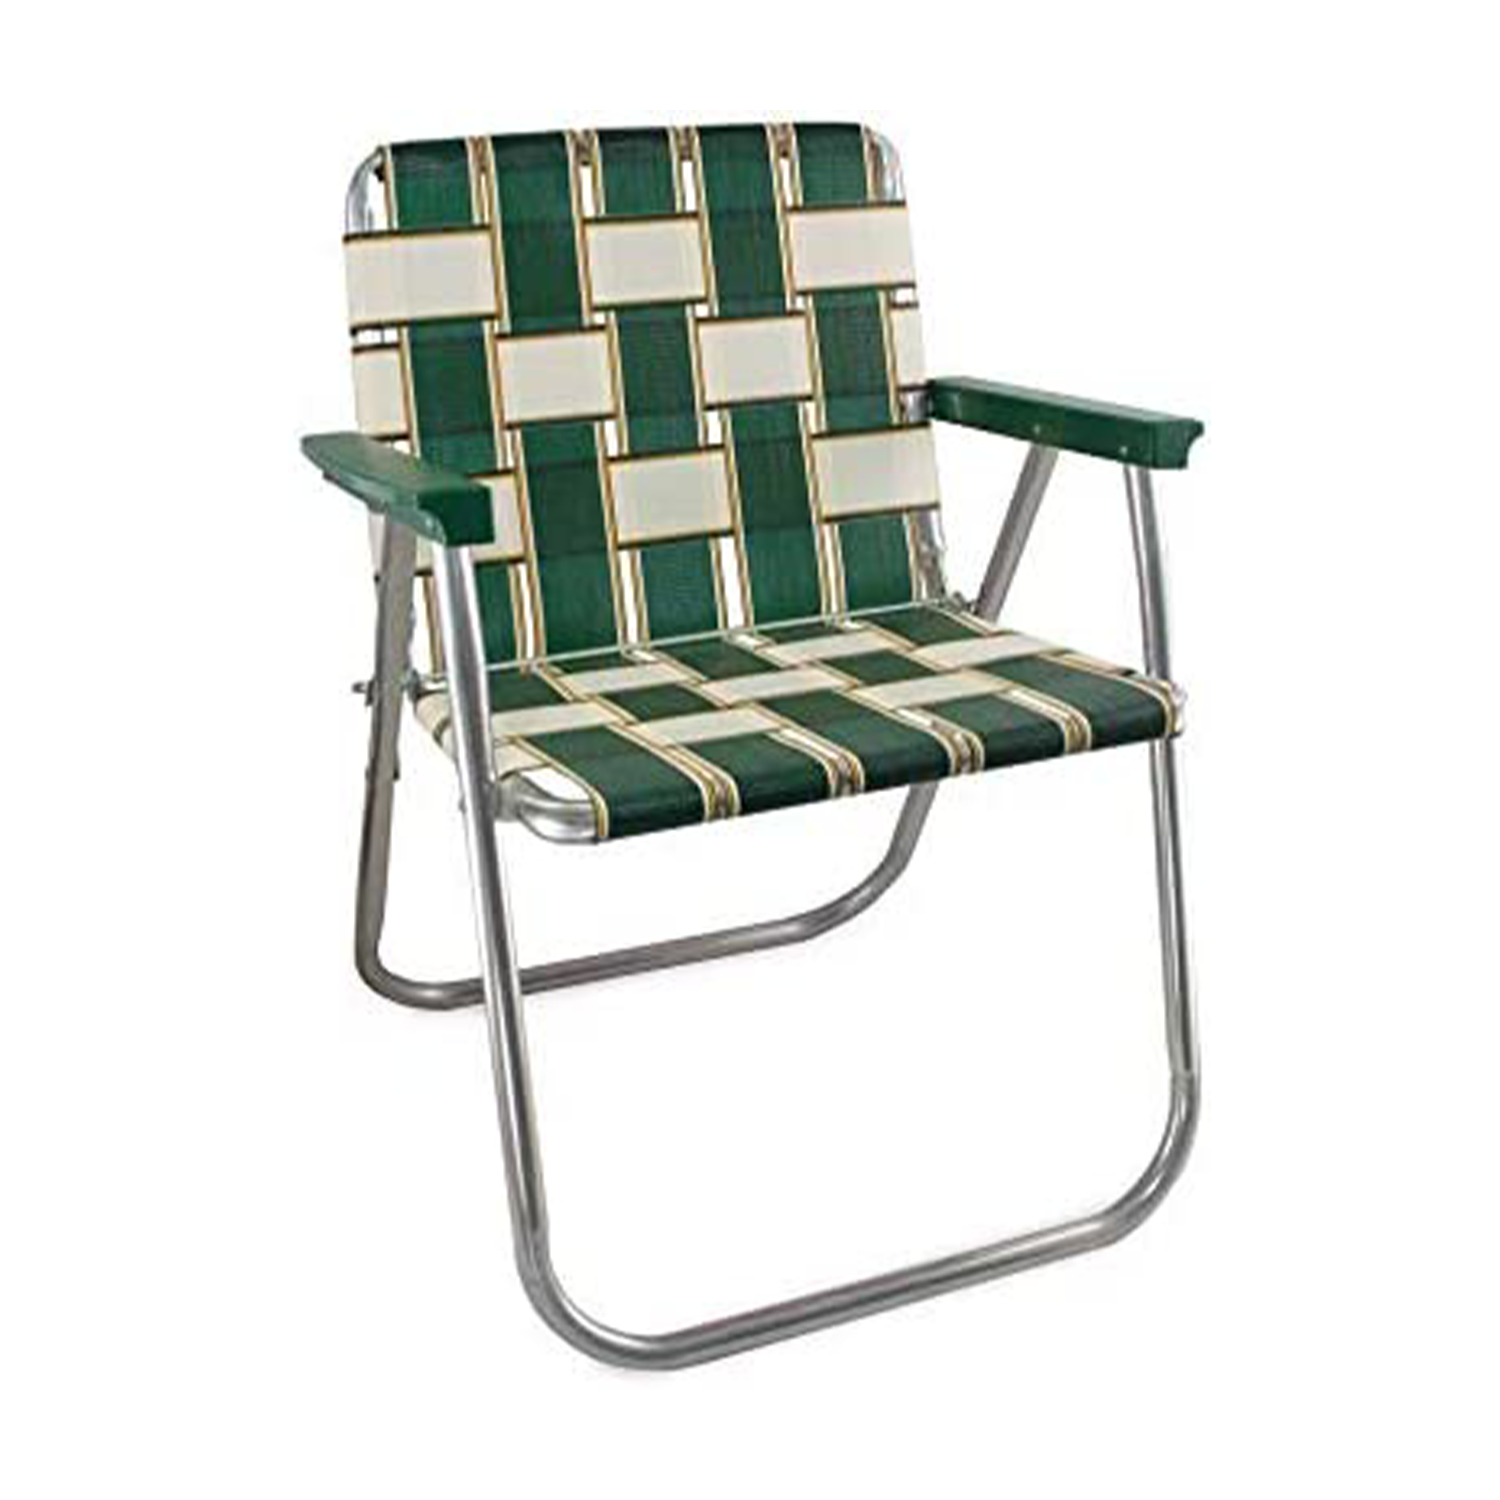 picnic chair with green and white webbing and green plastic arms